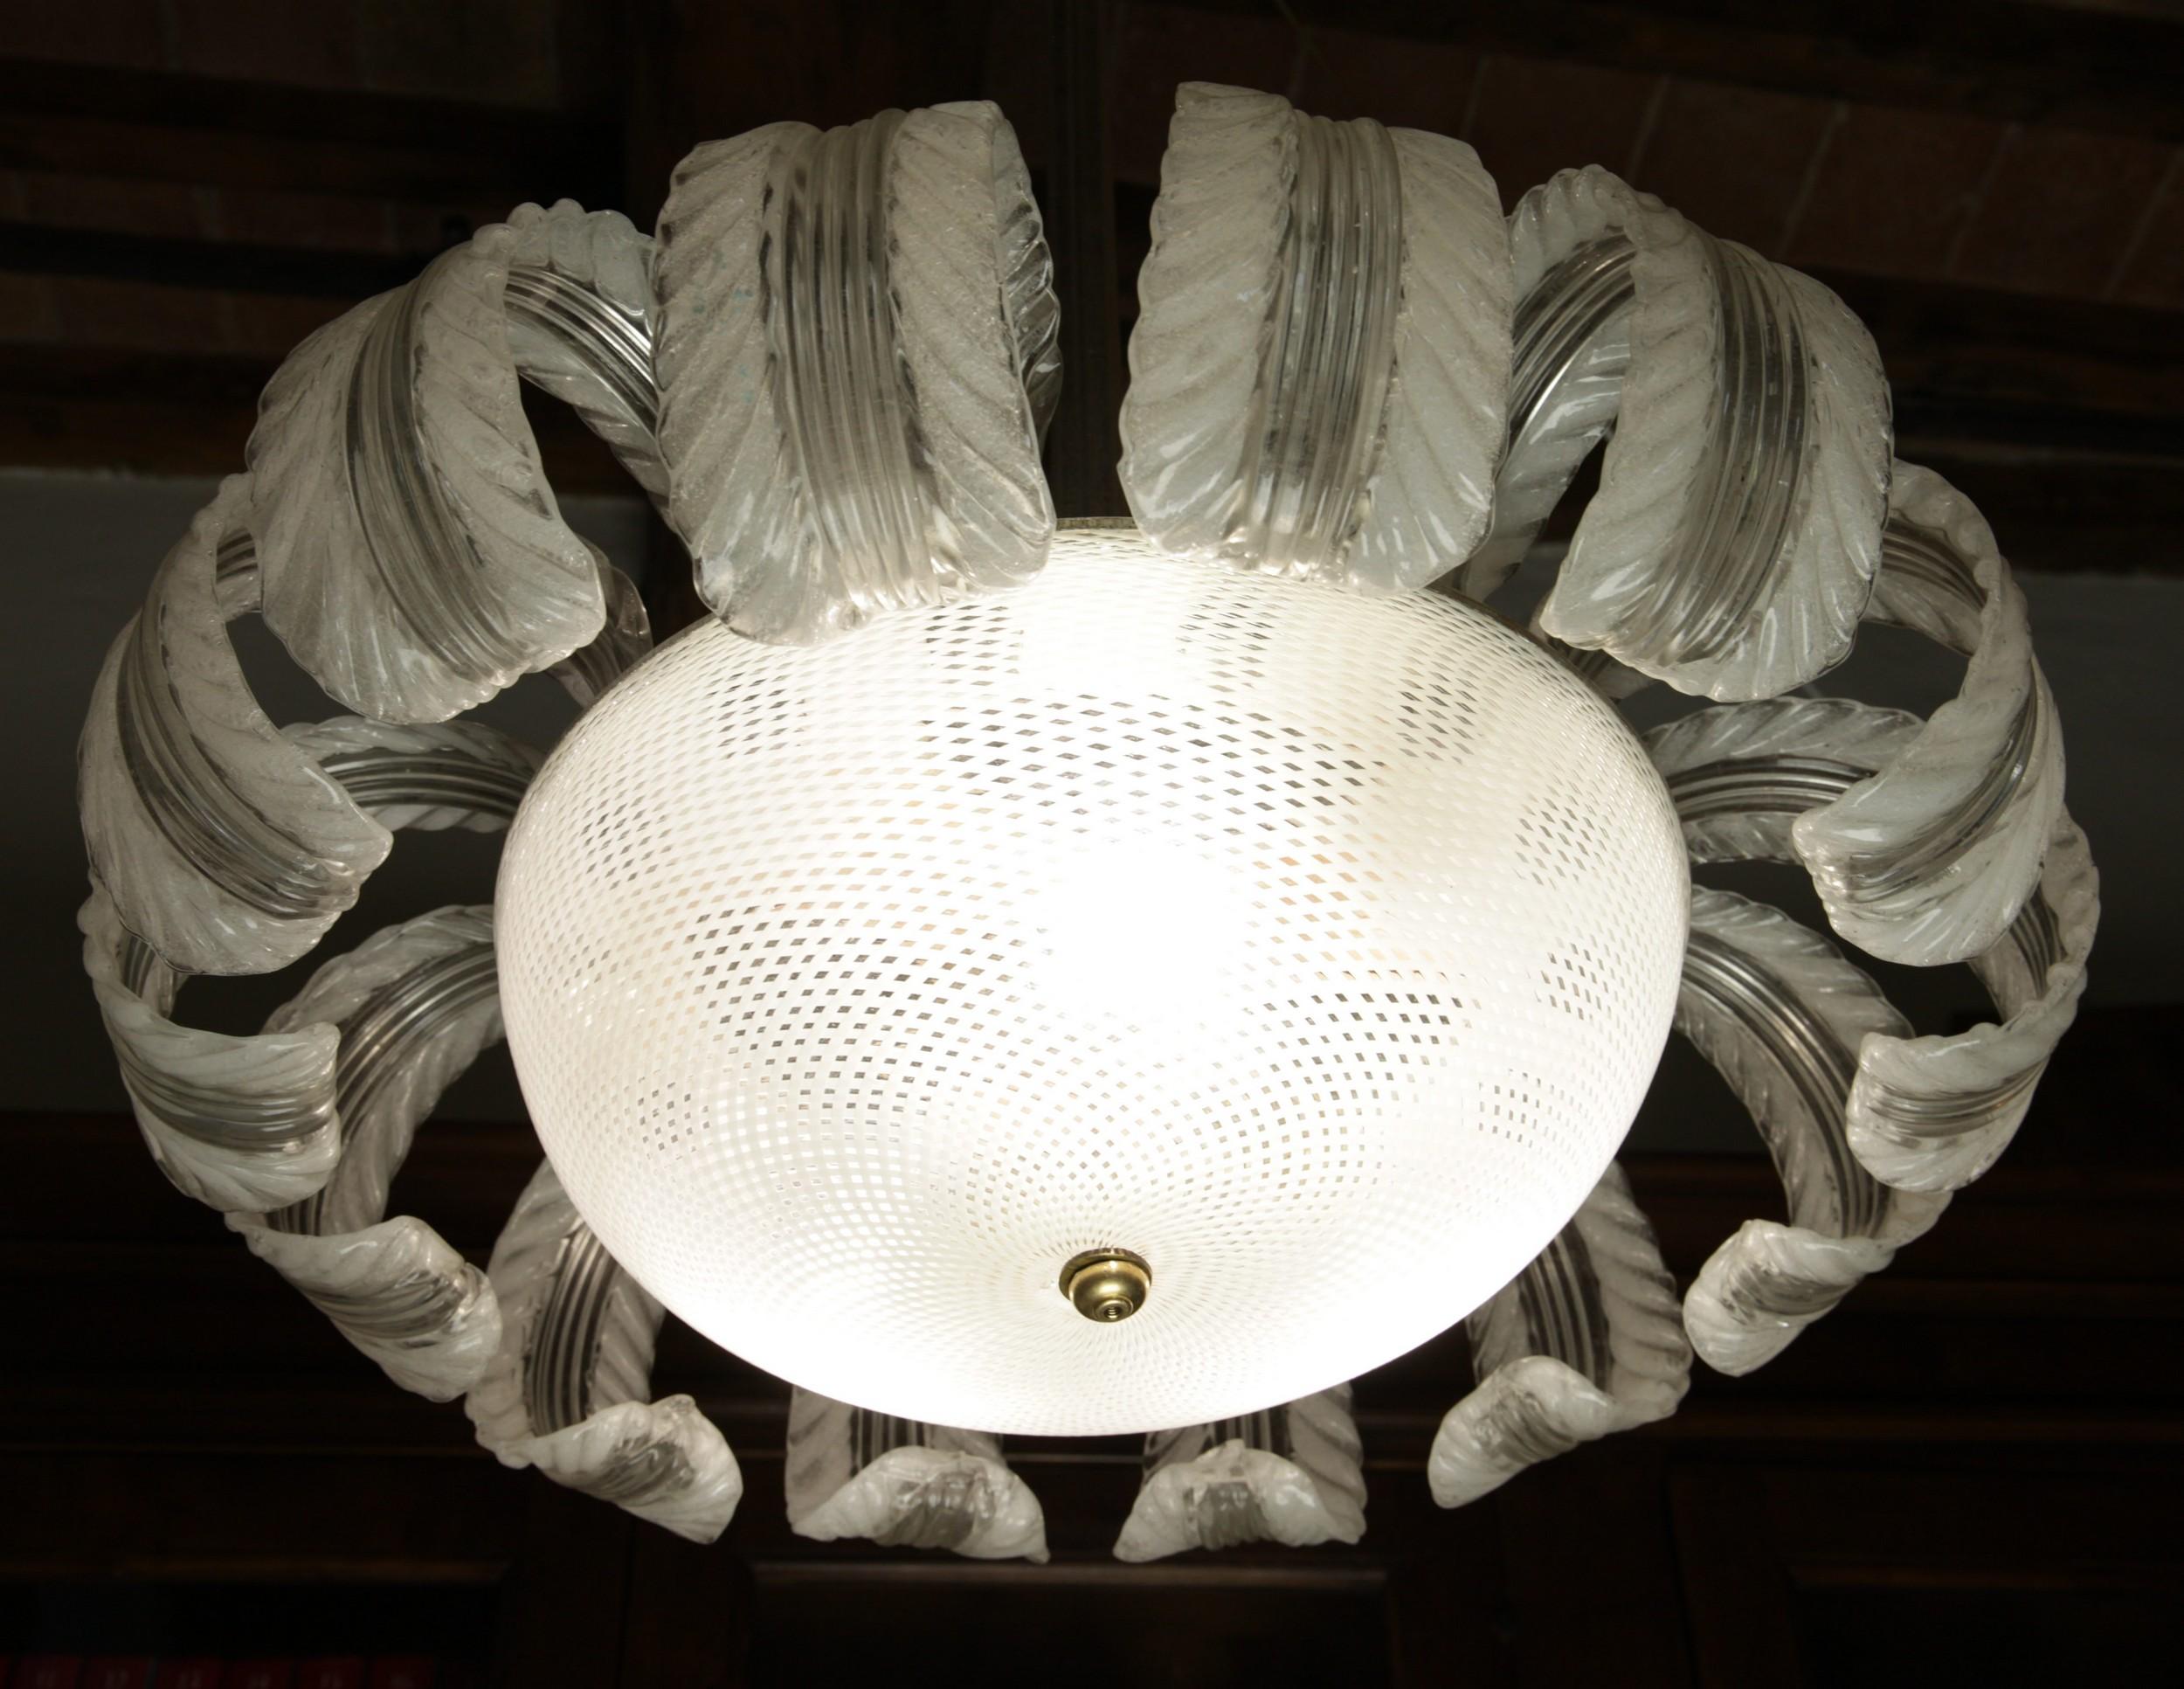 Sculptural chandelier with a unique combination of reticello and Pulegoso finis.
The reticello bowl what indicates the decade. It's made by overlapping two filigree bowls spiralizer in opposite directions. Before Carlo Scarpa and Dino Martens works